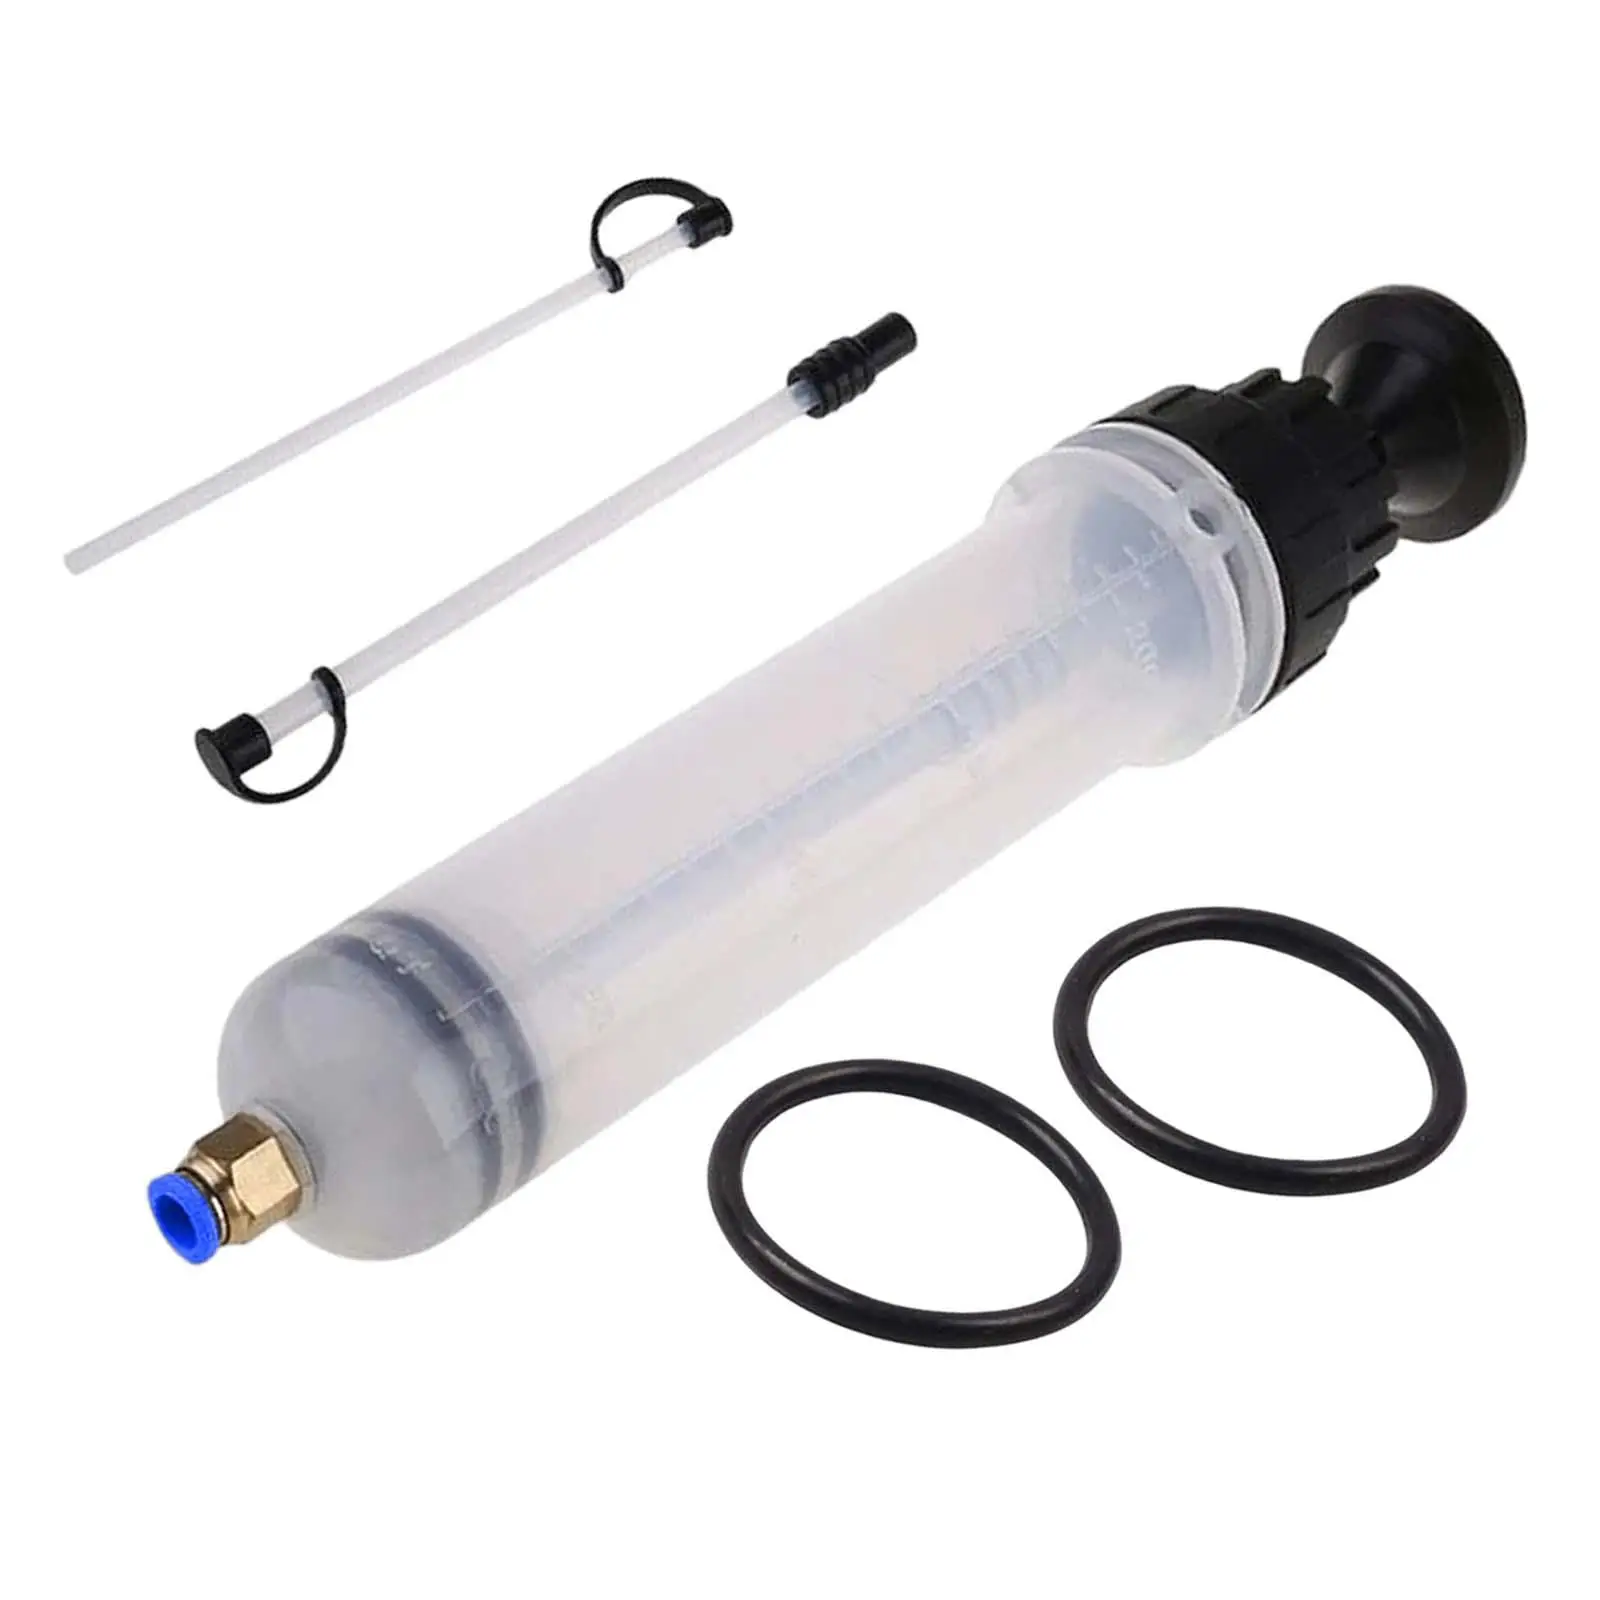 Car Brake Fluid Extractor Fluid Transfer Pump Tool Fluid Extraction 500cc Universal for Car Motorcycle Boats RV Vehicles